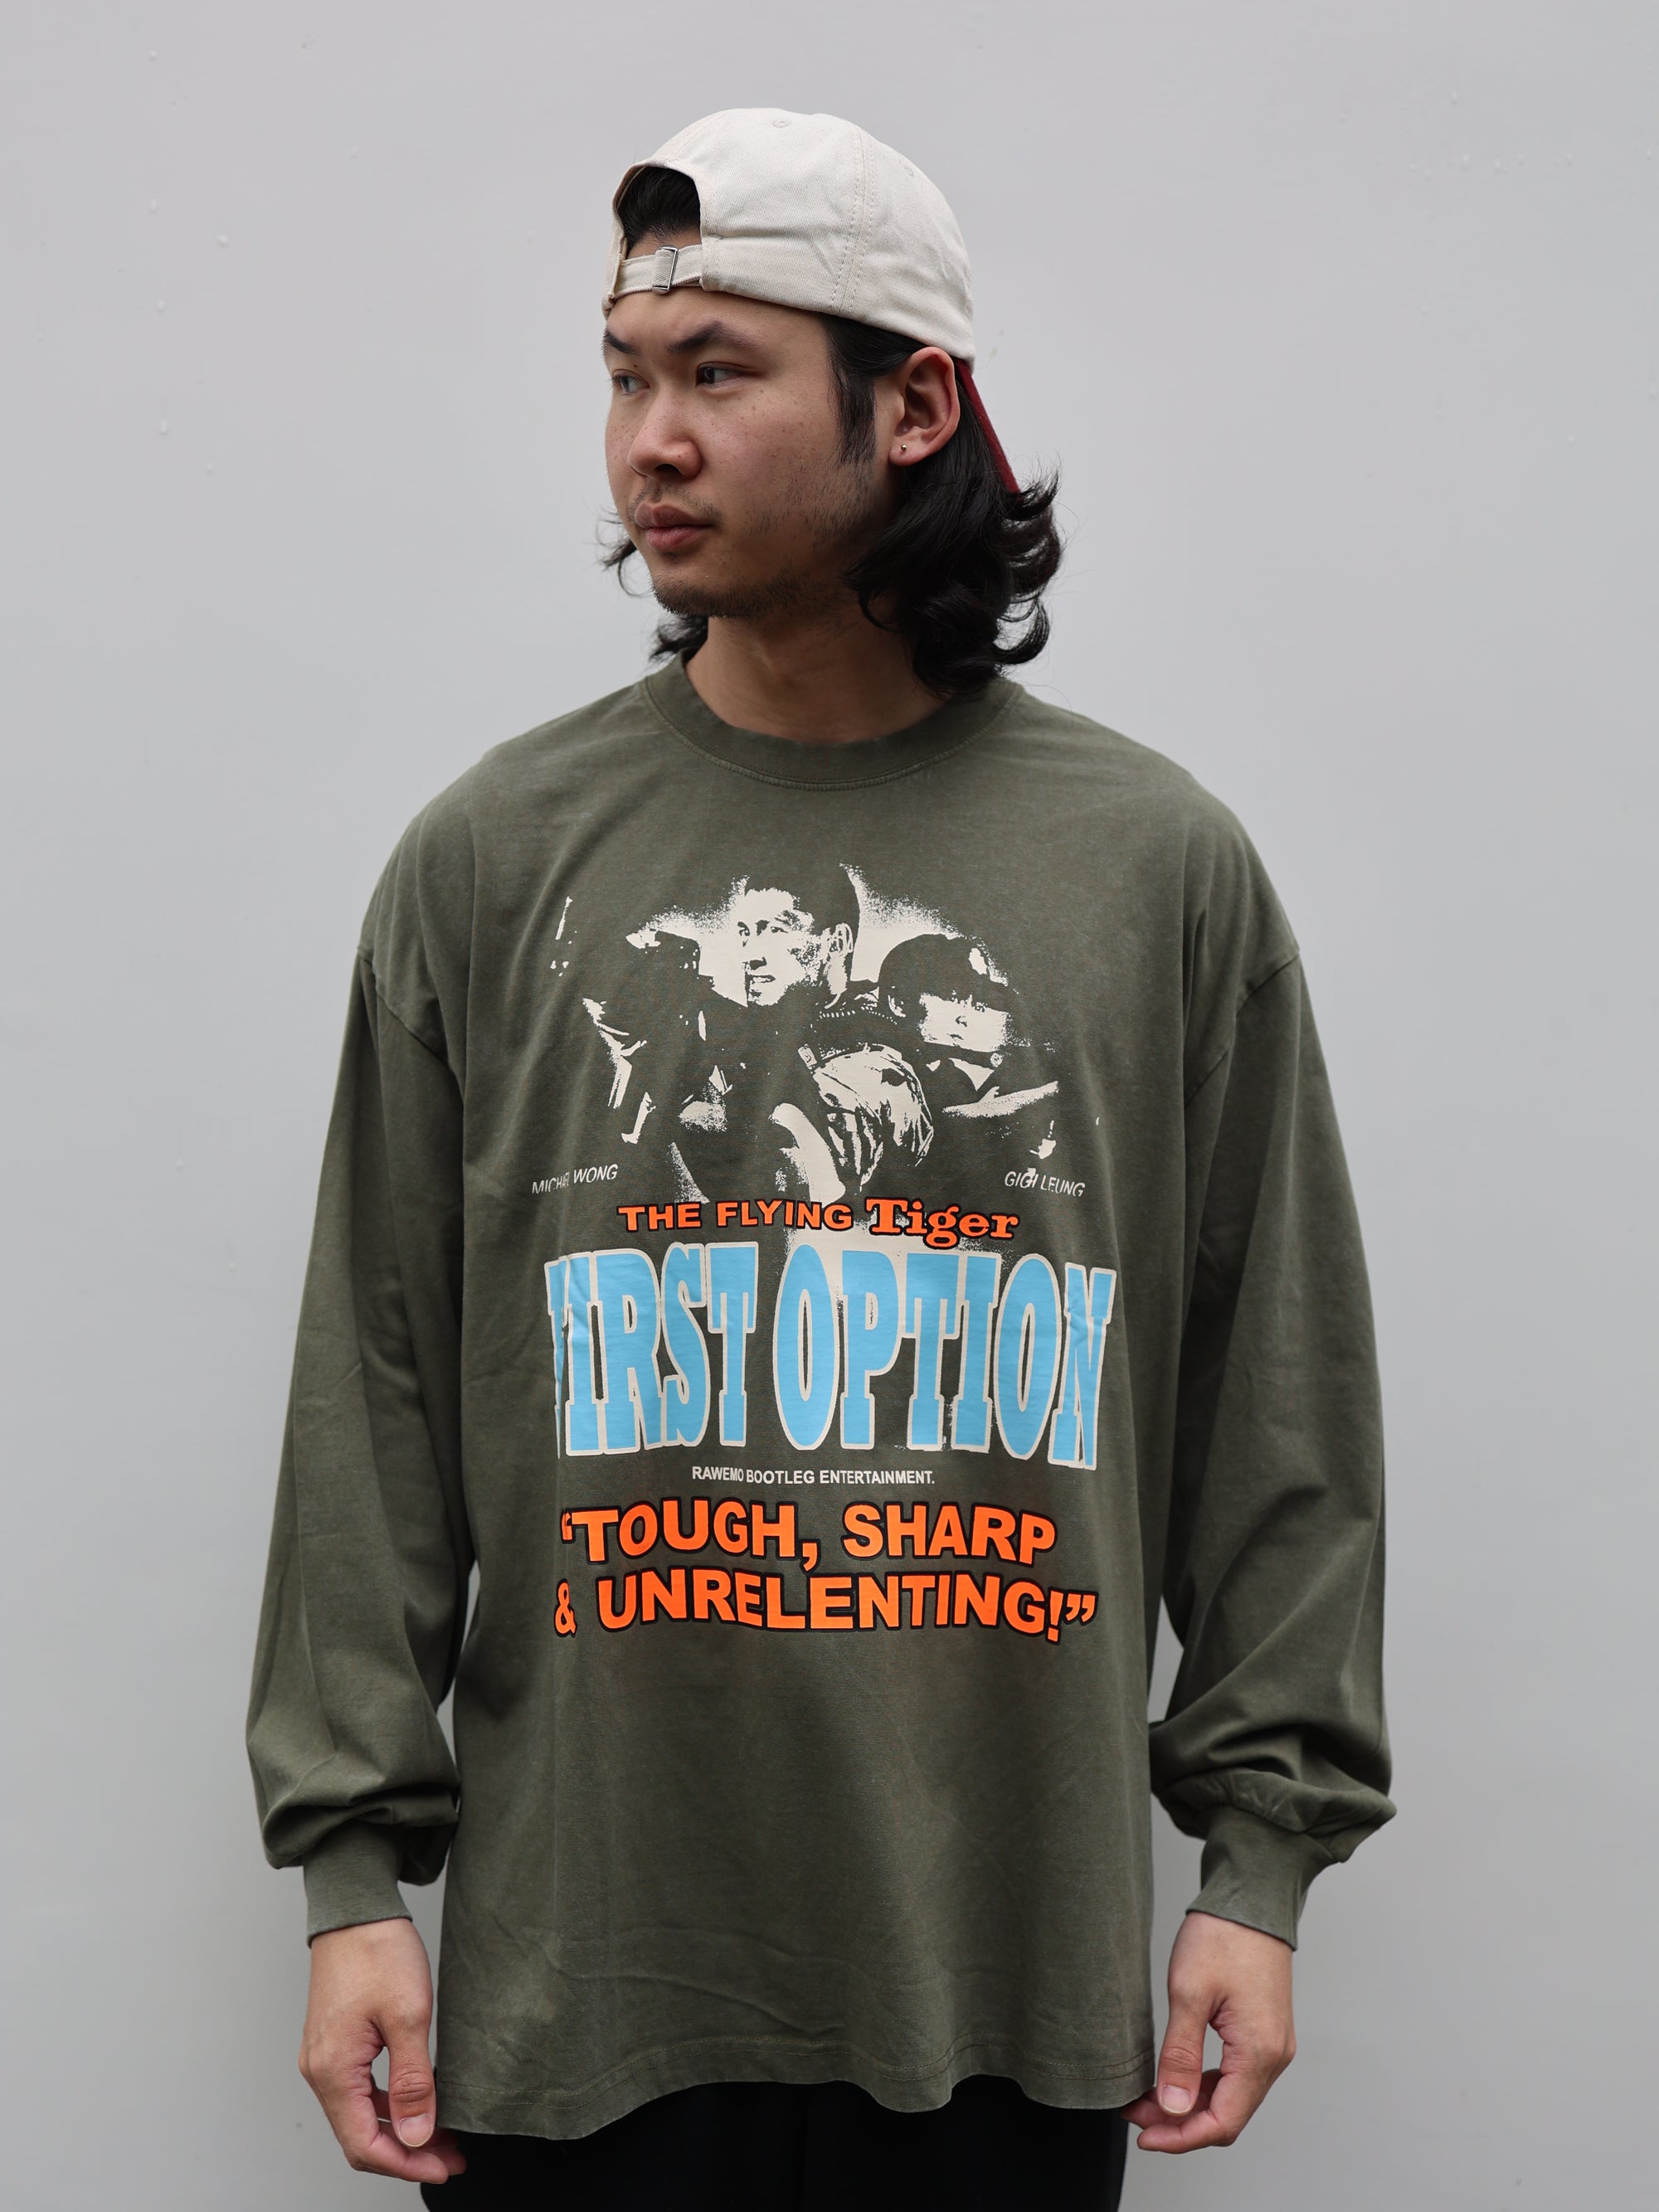 *EXCLUSIVE* First Option Washed LS Tee